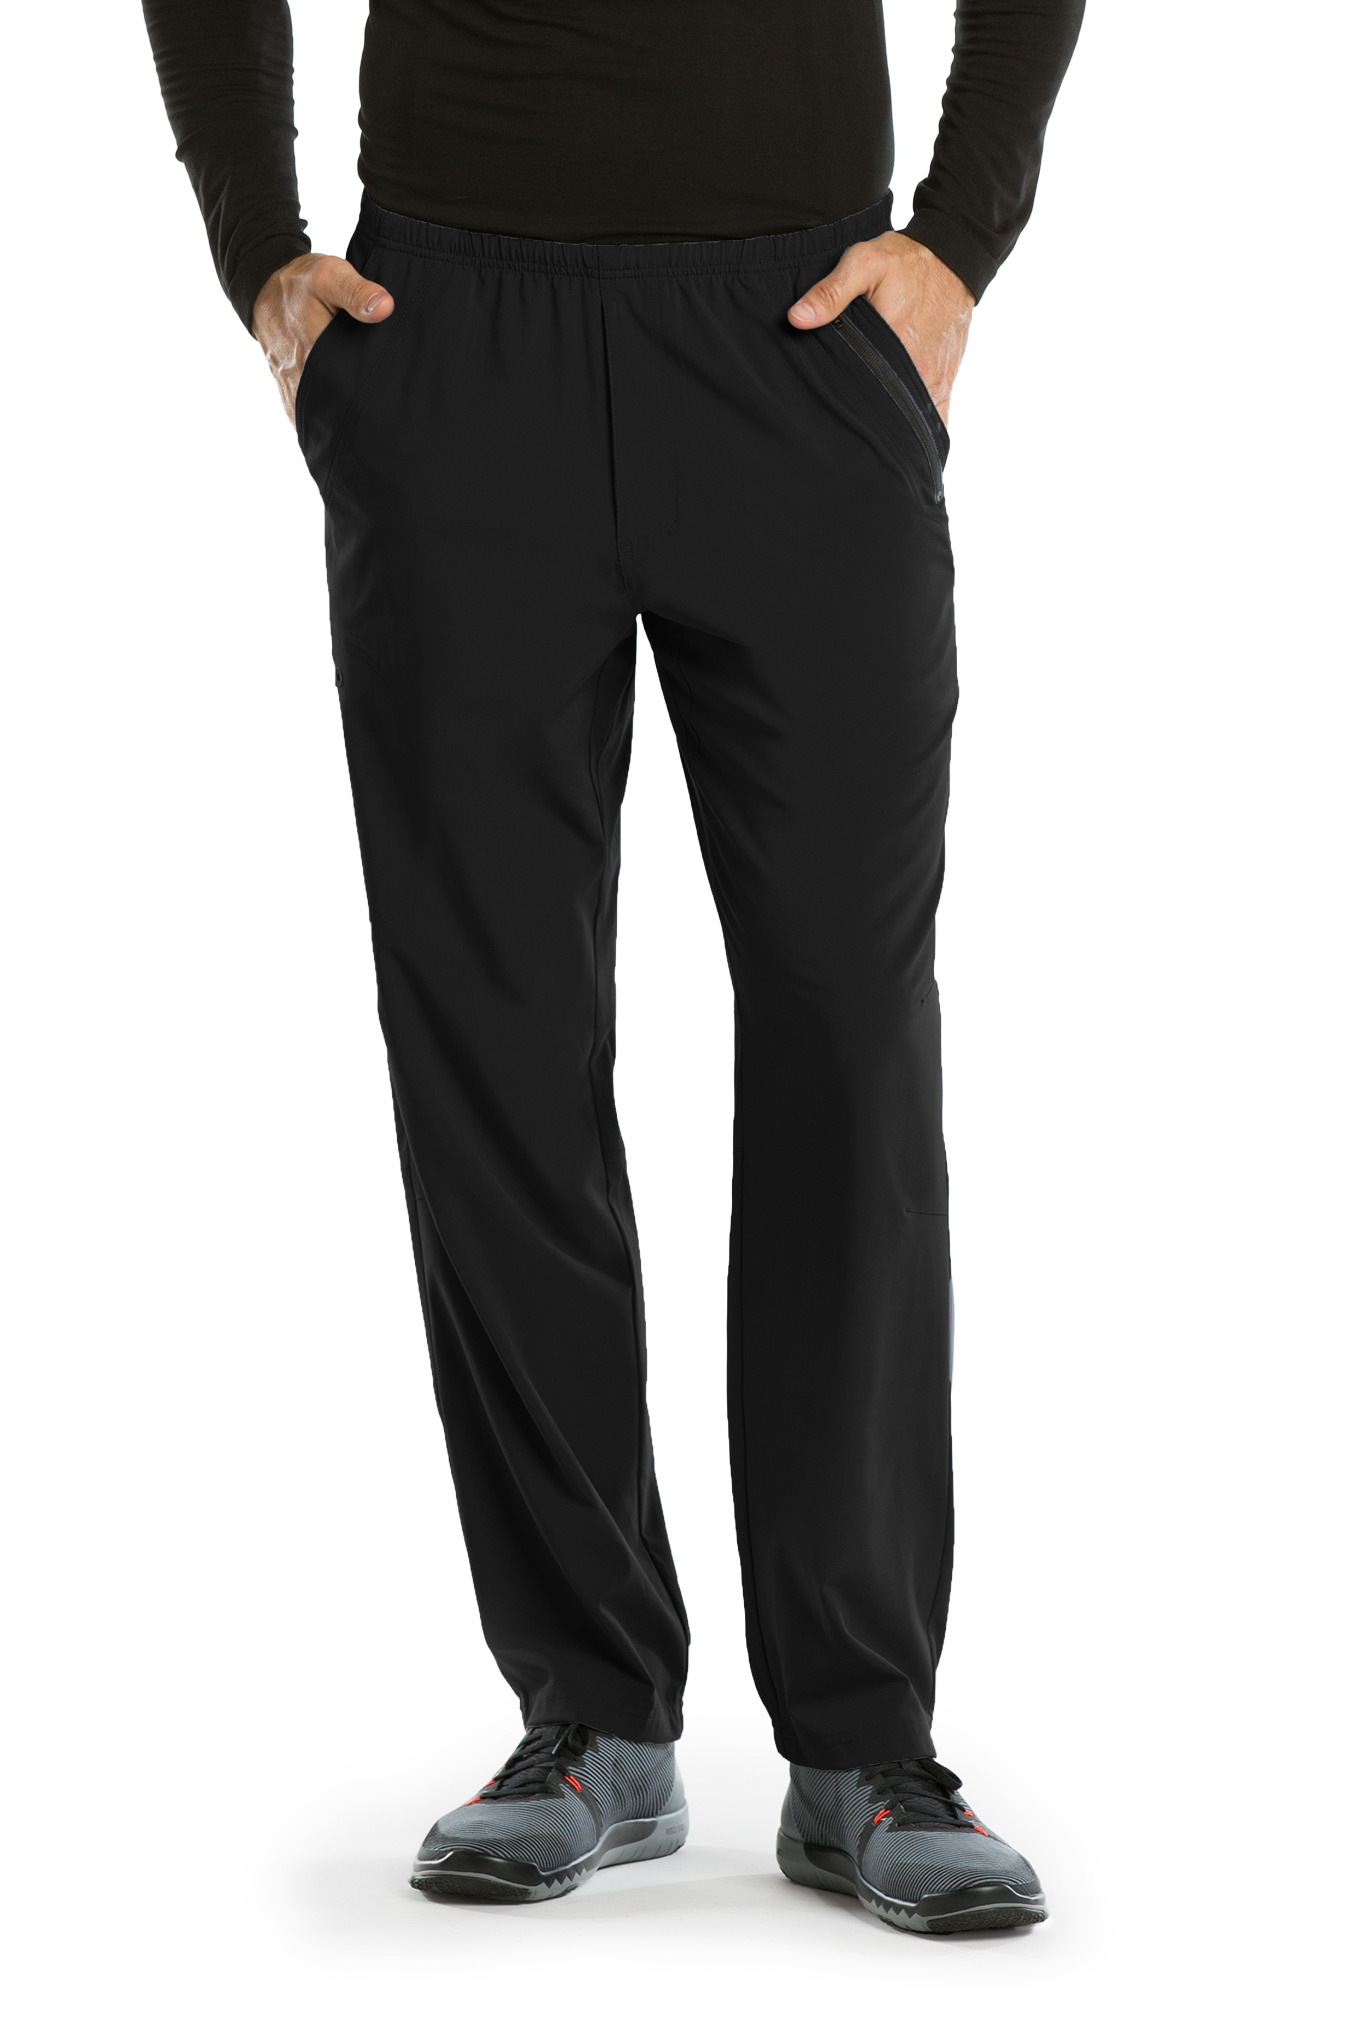 Barco One Amplify Pant-